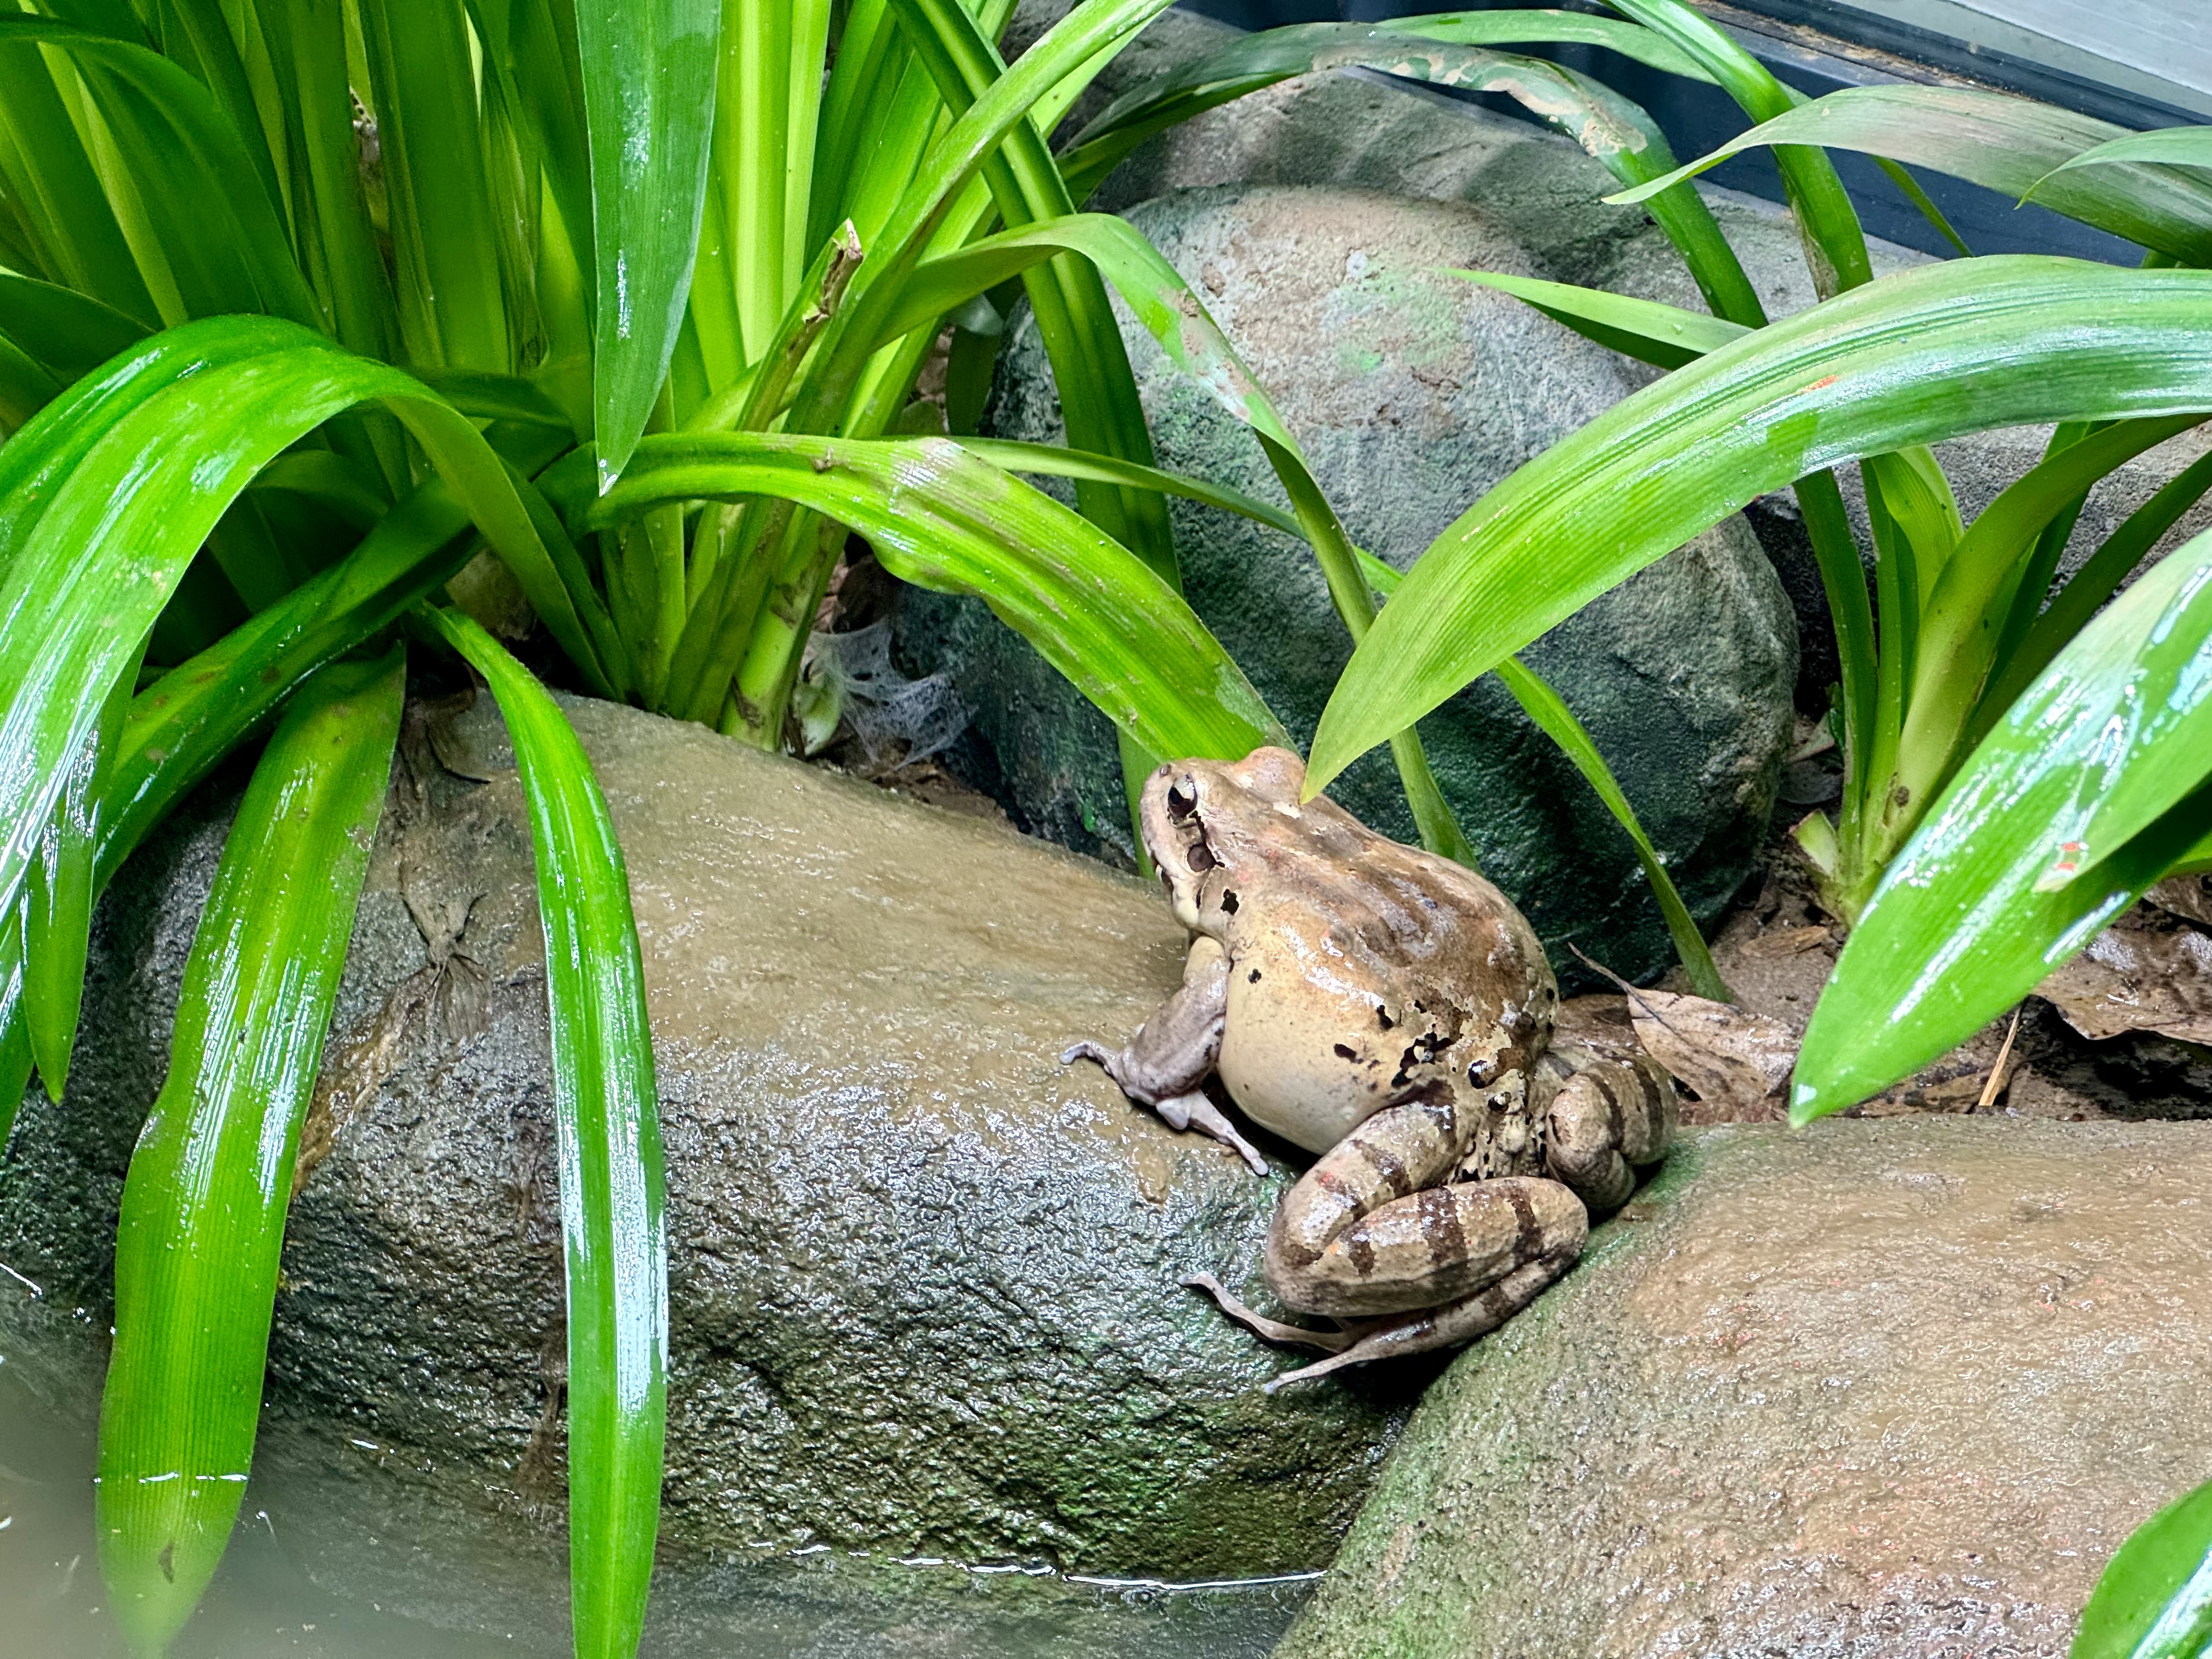 Adult mountain chicken frog sitting on rock amid greenery at London Zoo